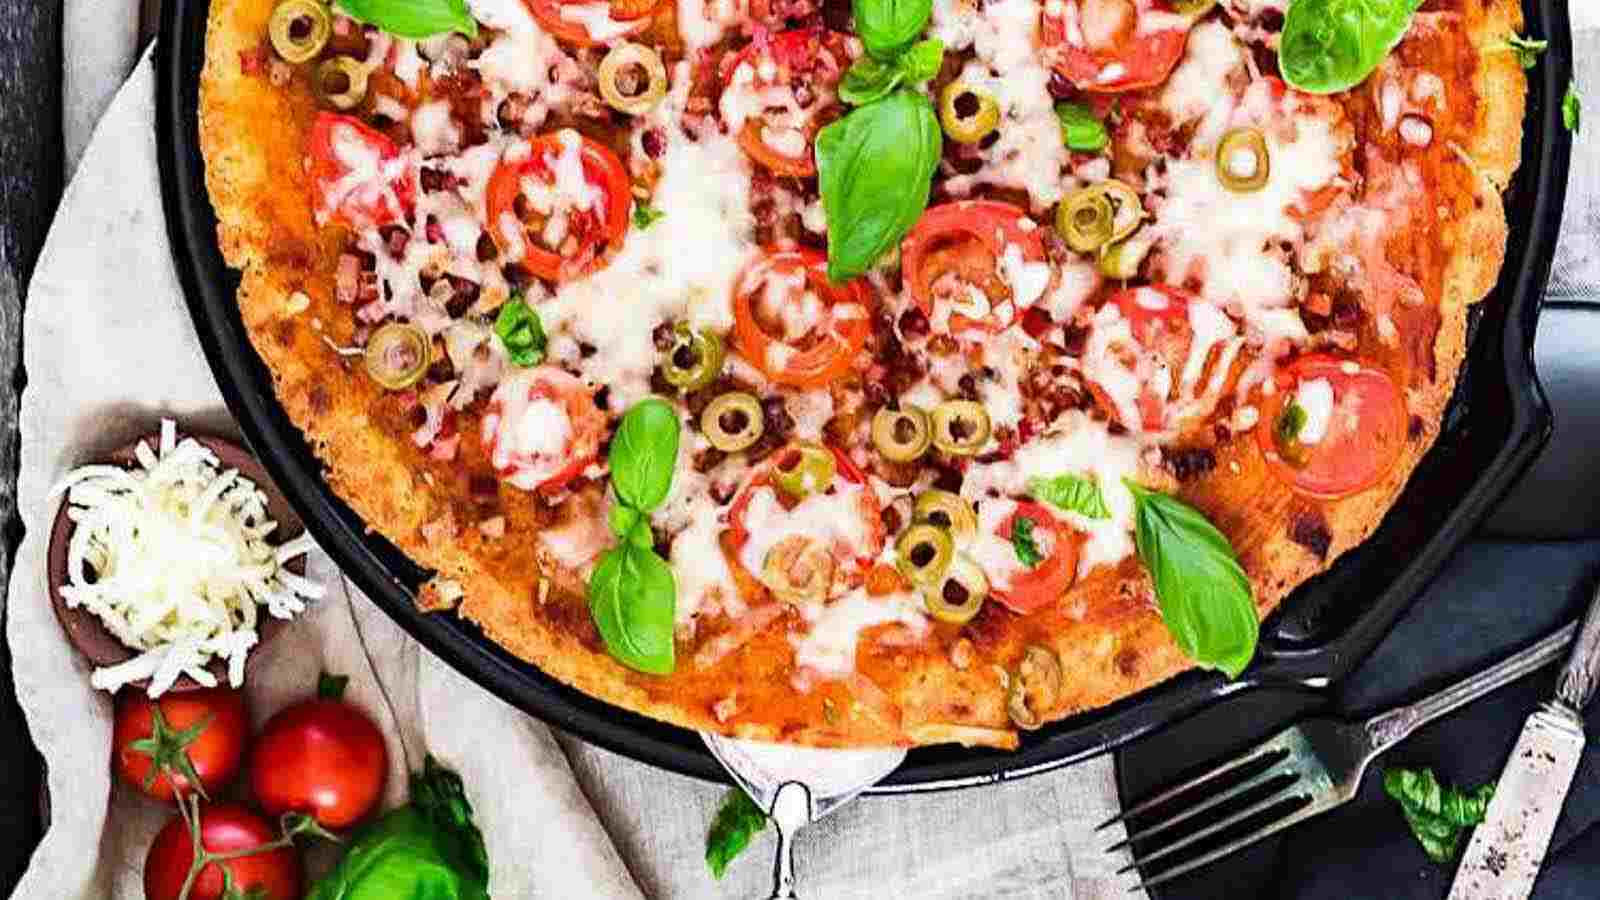 A pizza in a skillet with tomatoes and basil.